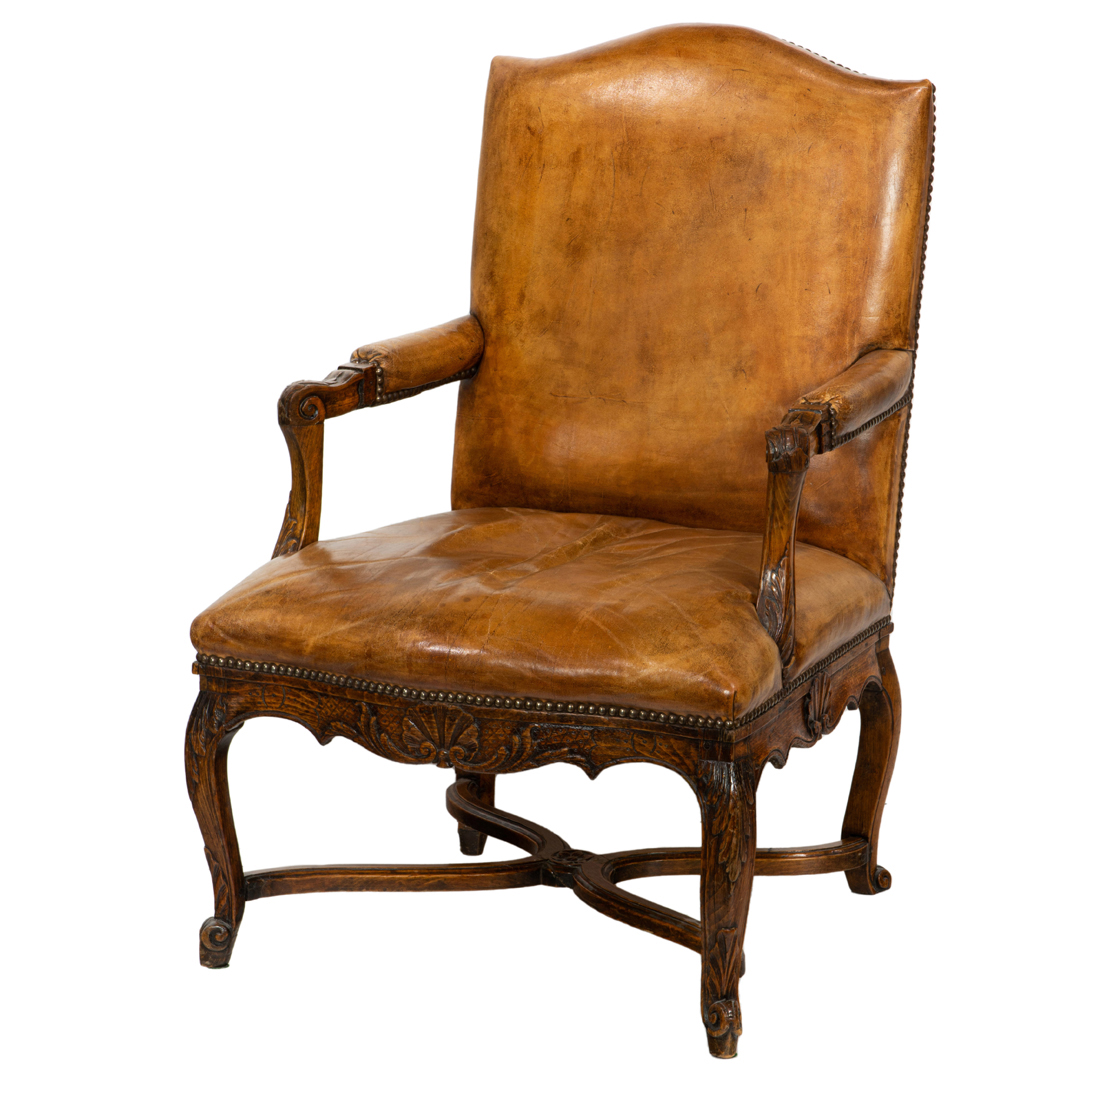 A FRENCH ROCOCO STYLE FAUTEUIL  3ce0a2